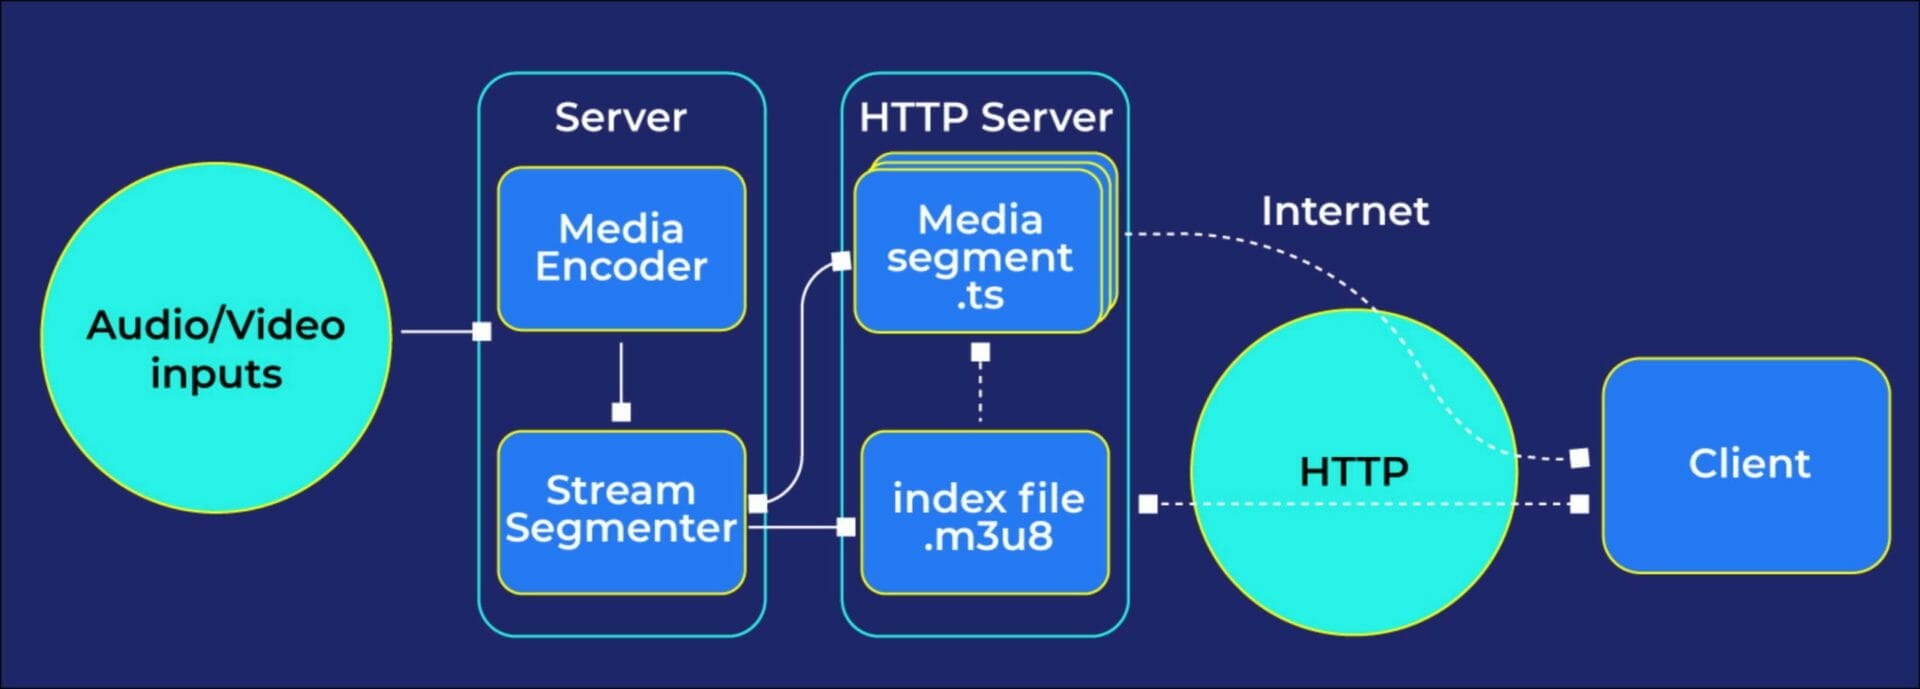 HTTP Live Streaming Protocol